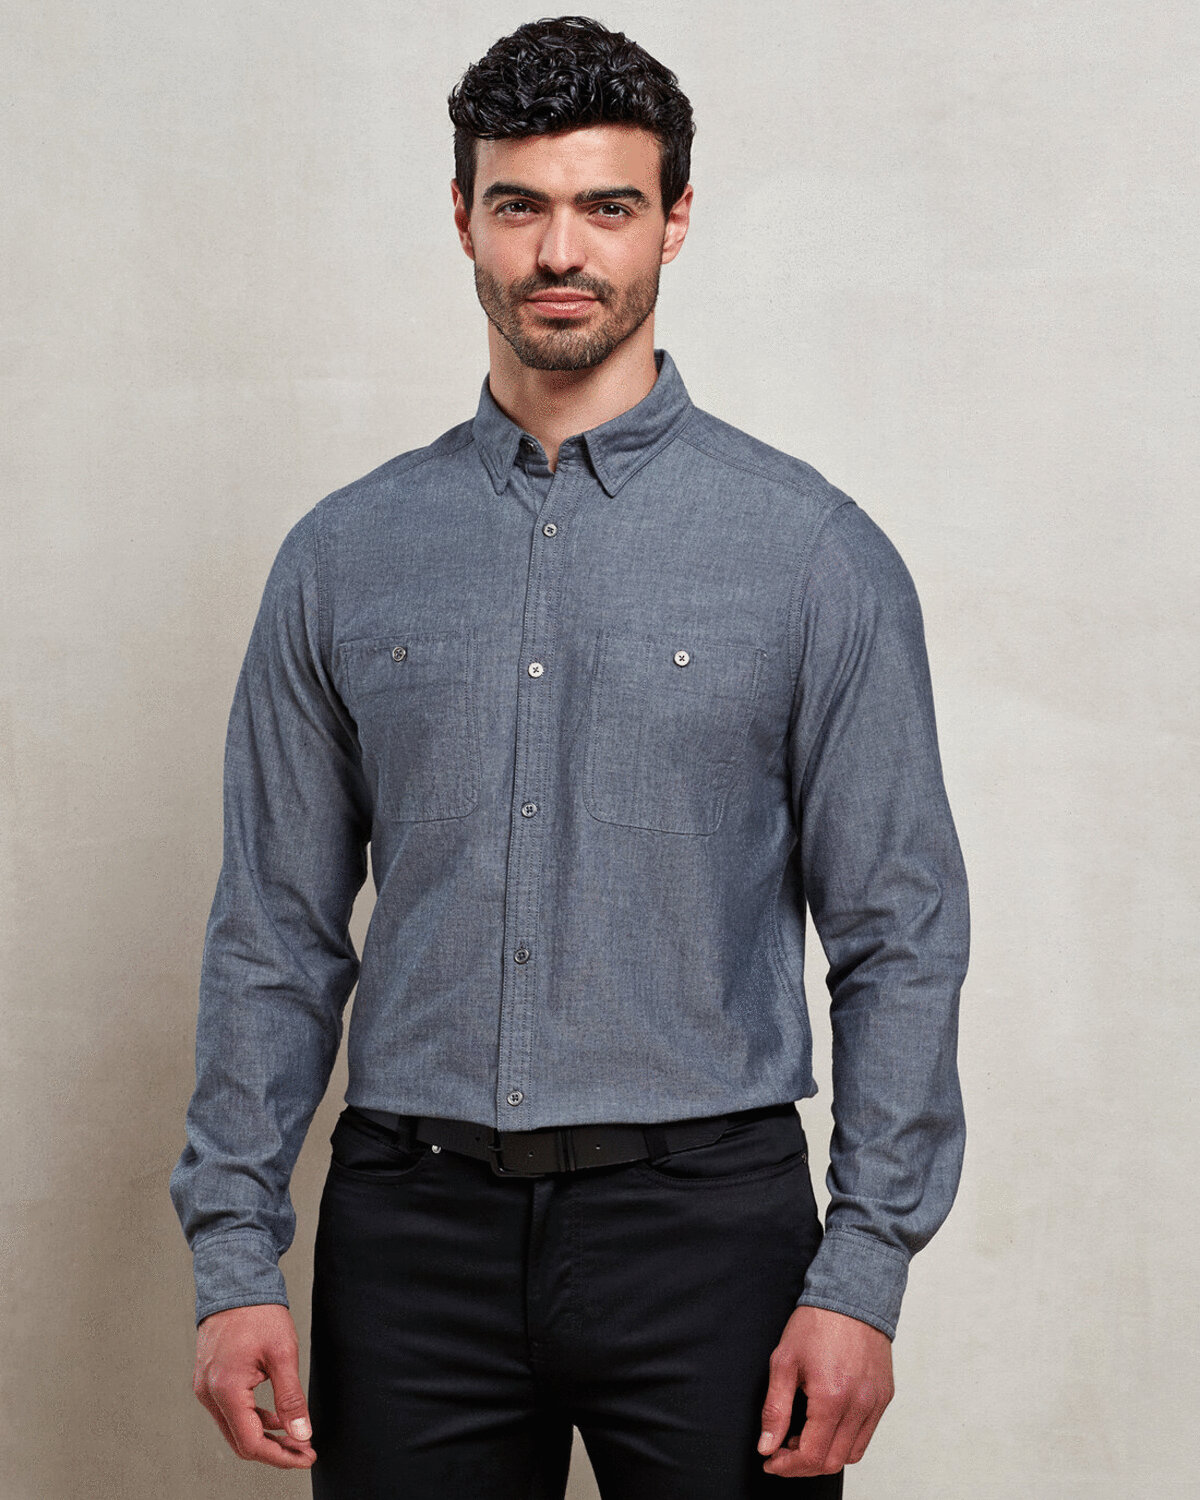 PR247M-FAIRTRADE AND ORGANIC CERTIFIED MENS LONG SLEEVE CHAMBRAY COTTON SHIRT